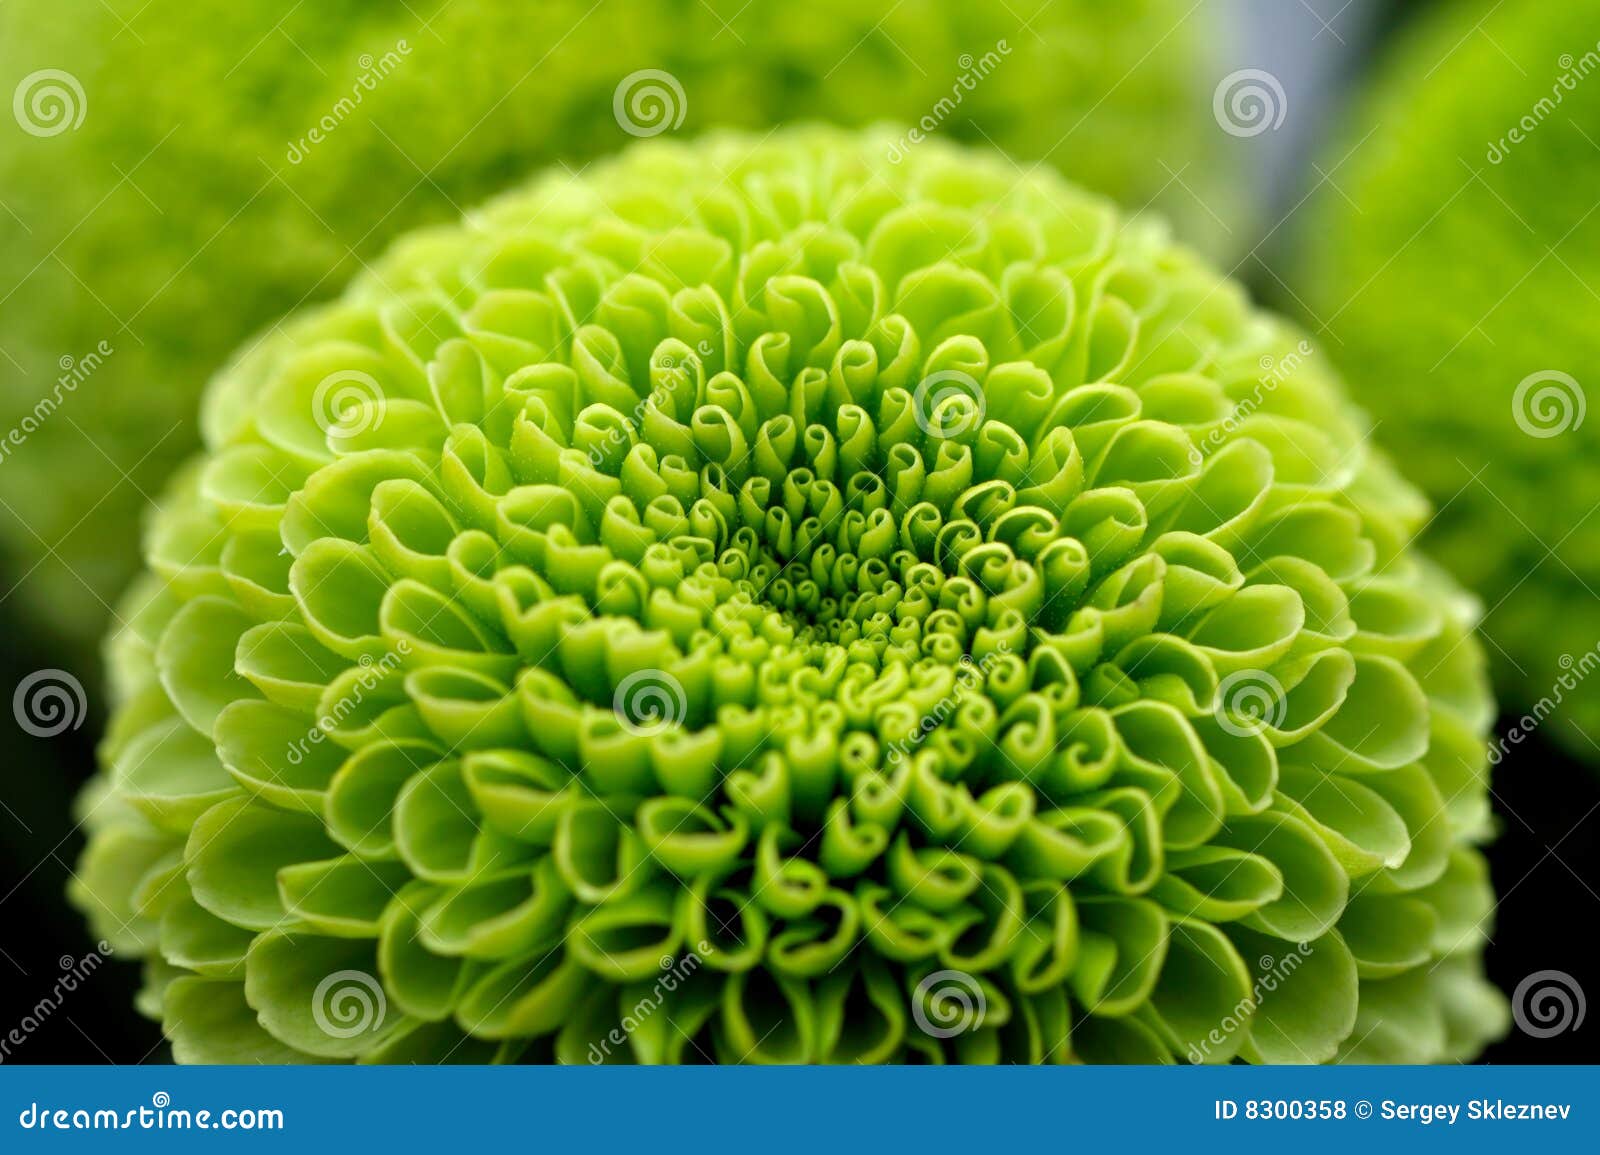 Green flower background stock photo. Image of detail, background - 8300358